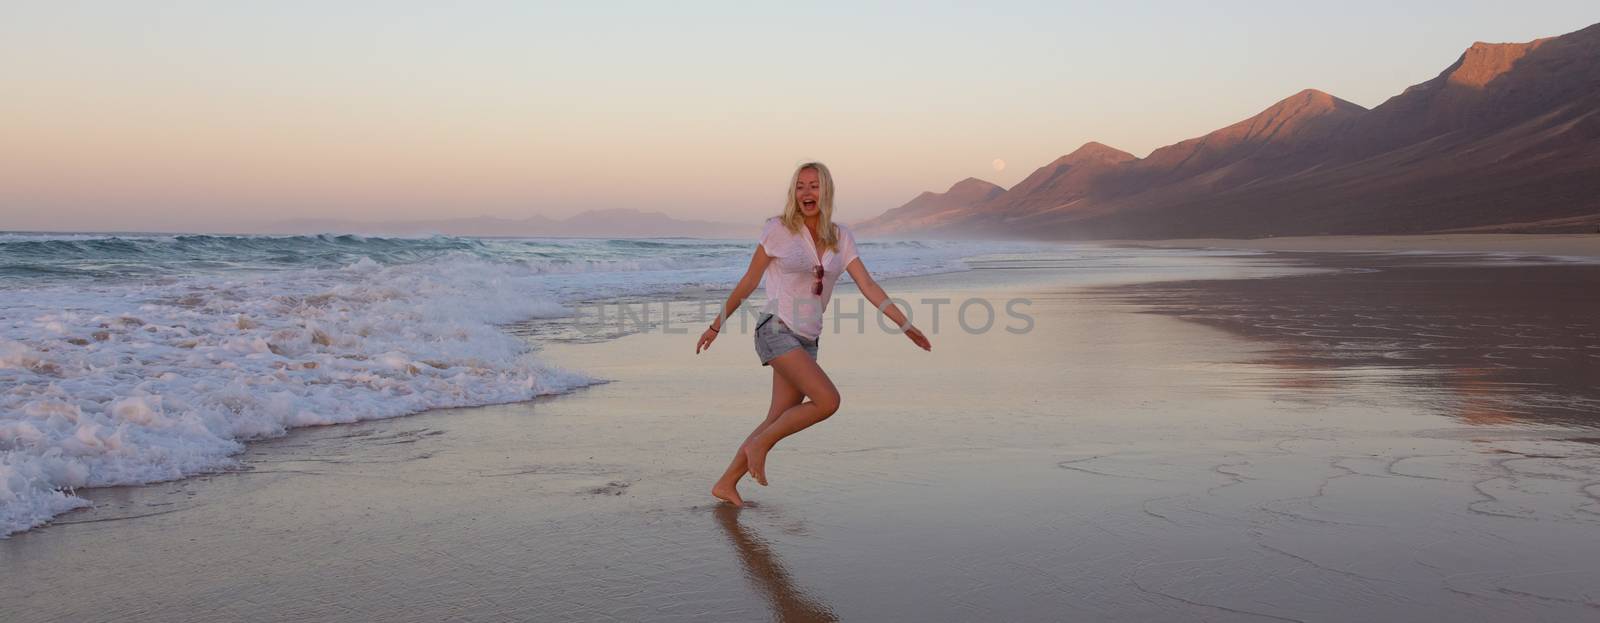 Lady enjoying running from waves on sandy beach in sunset. by kasto